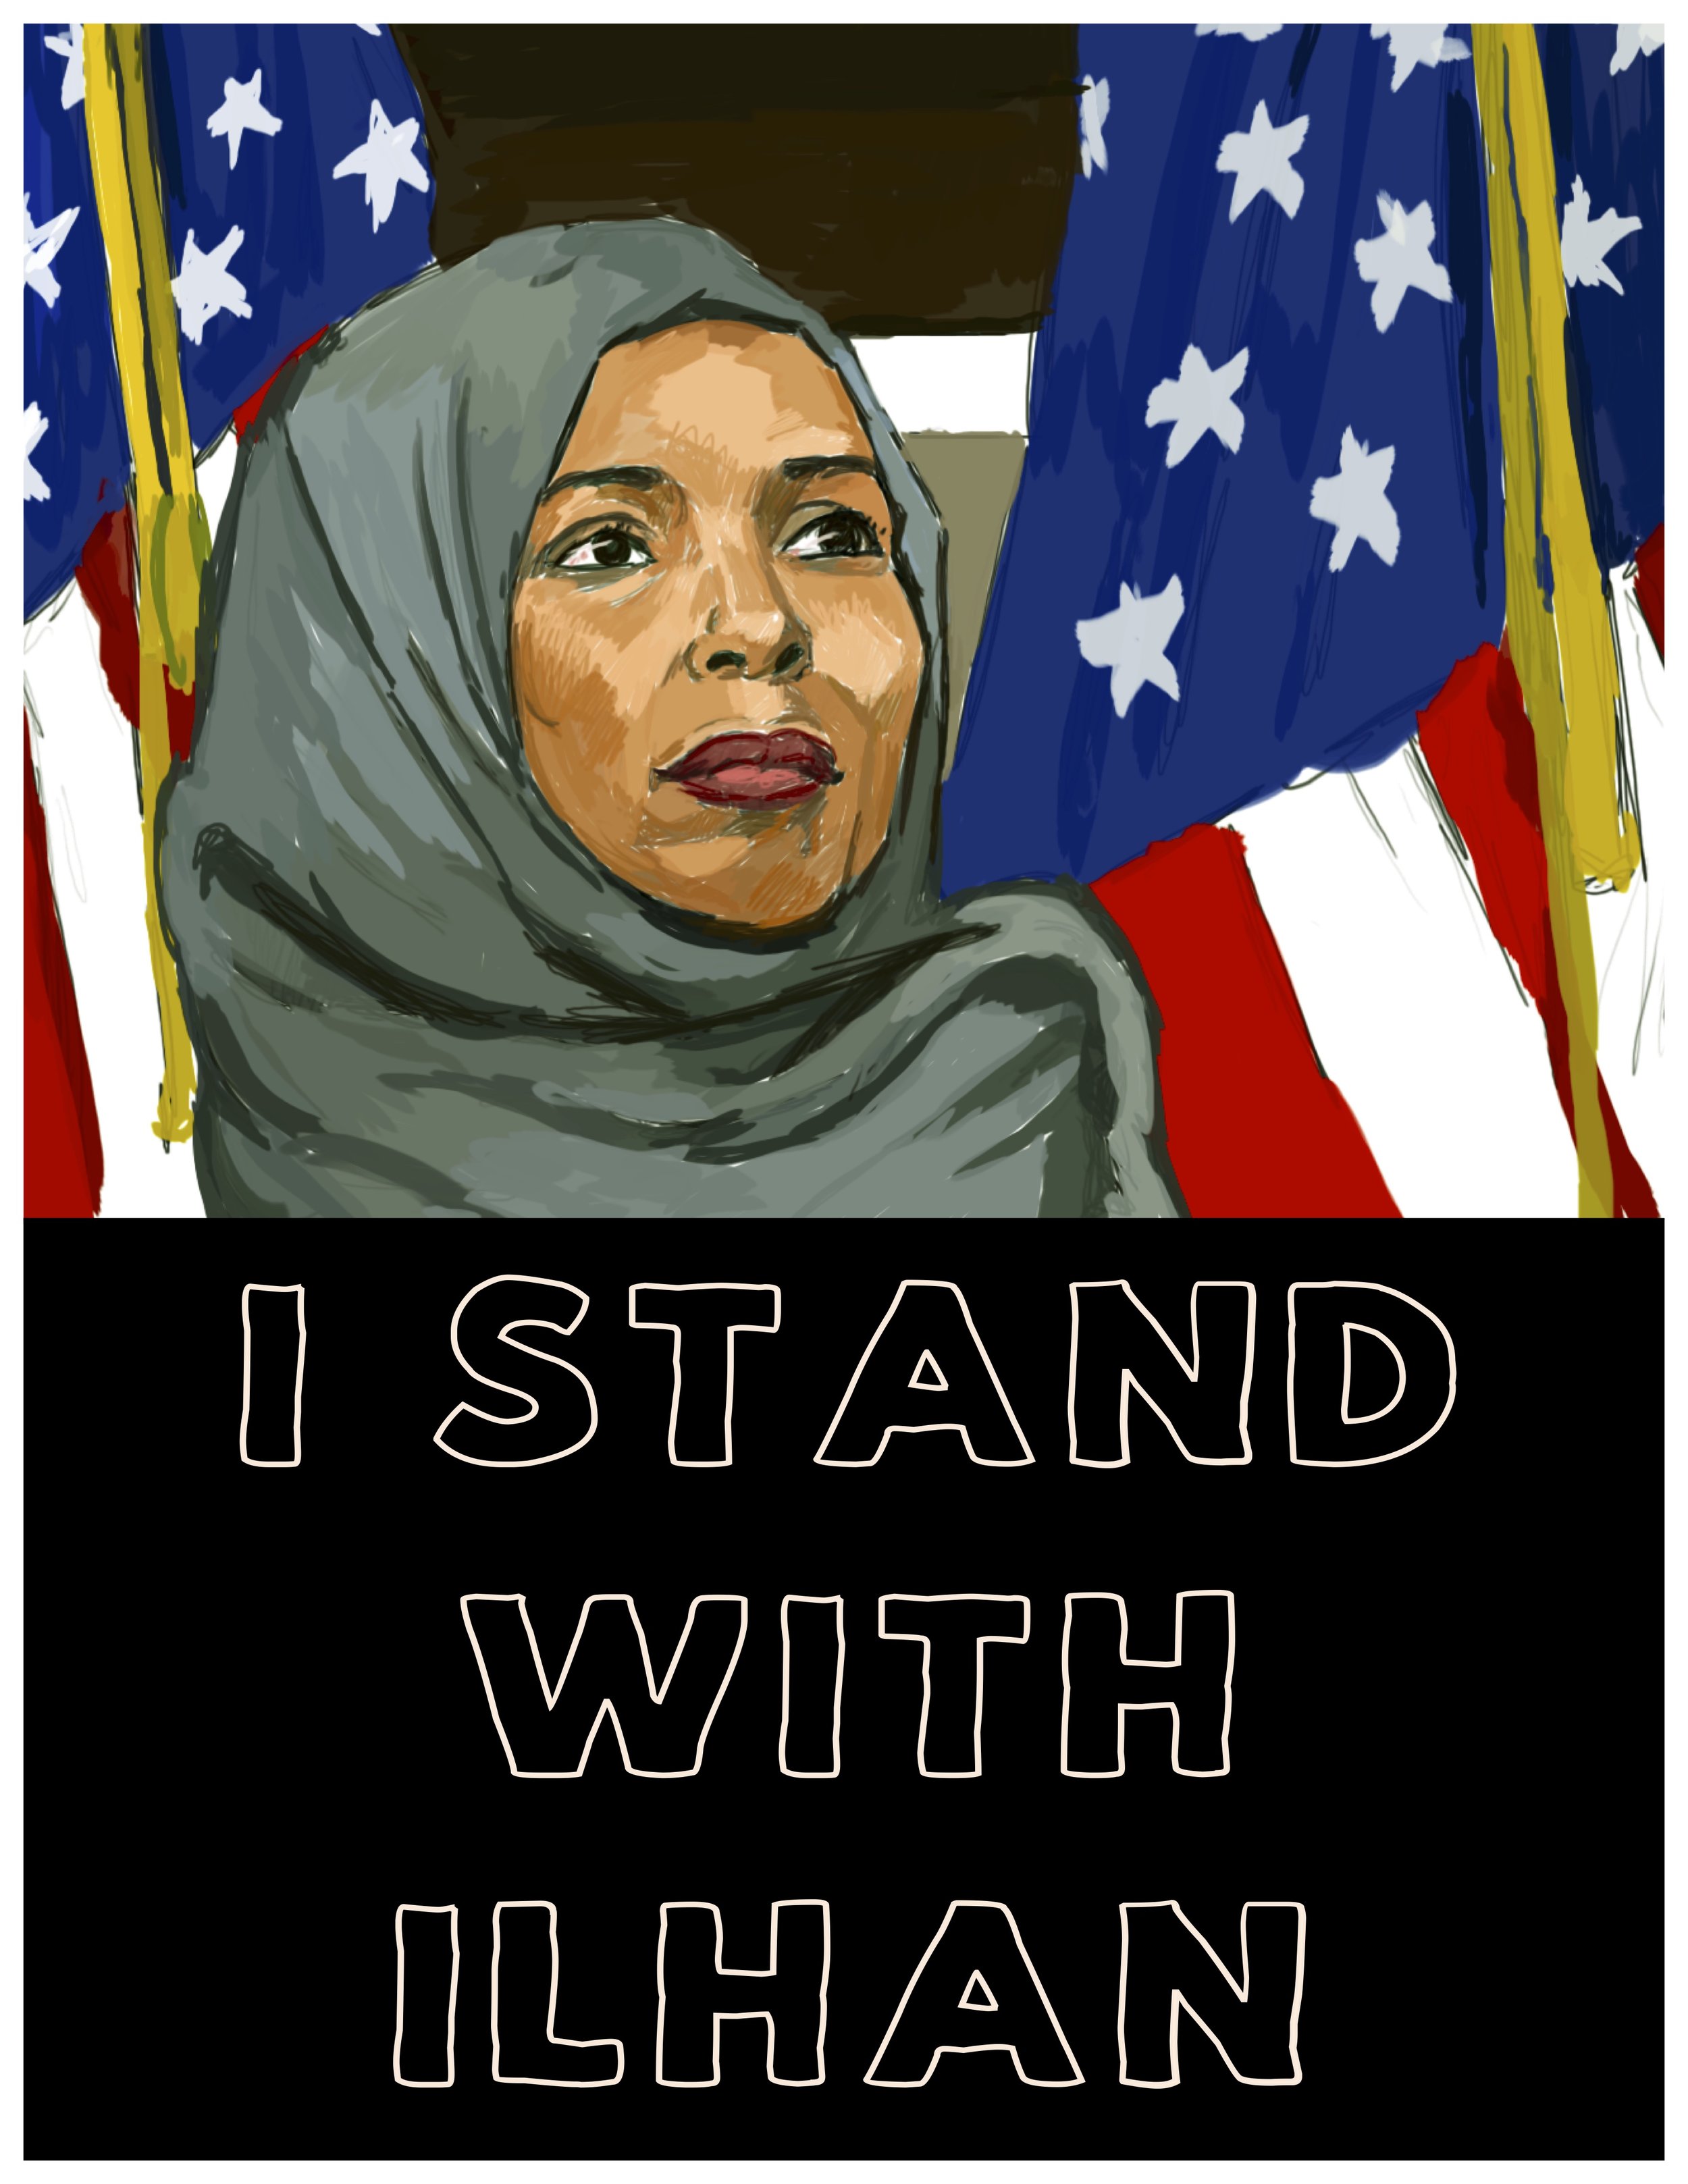 IStandwithIlhan.jpg